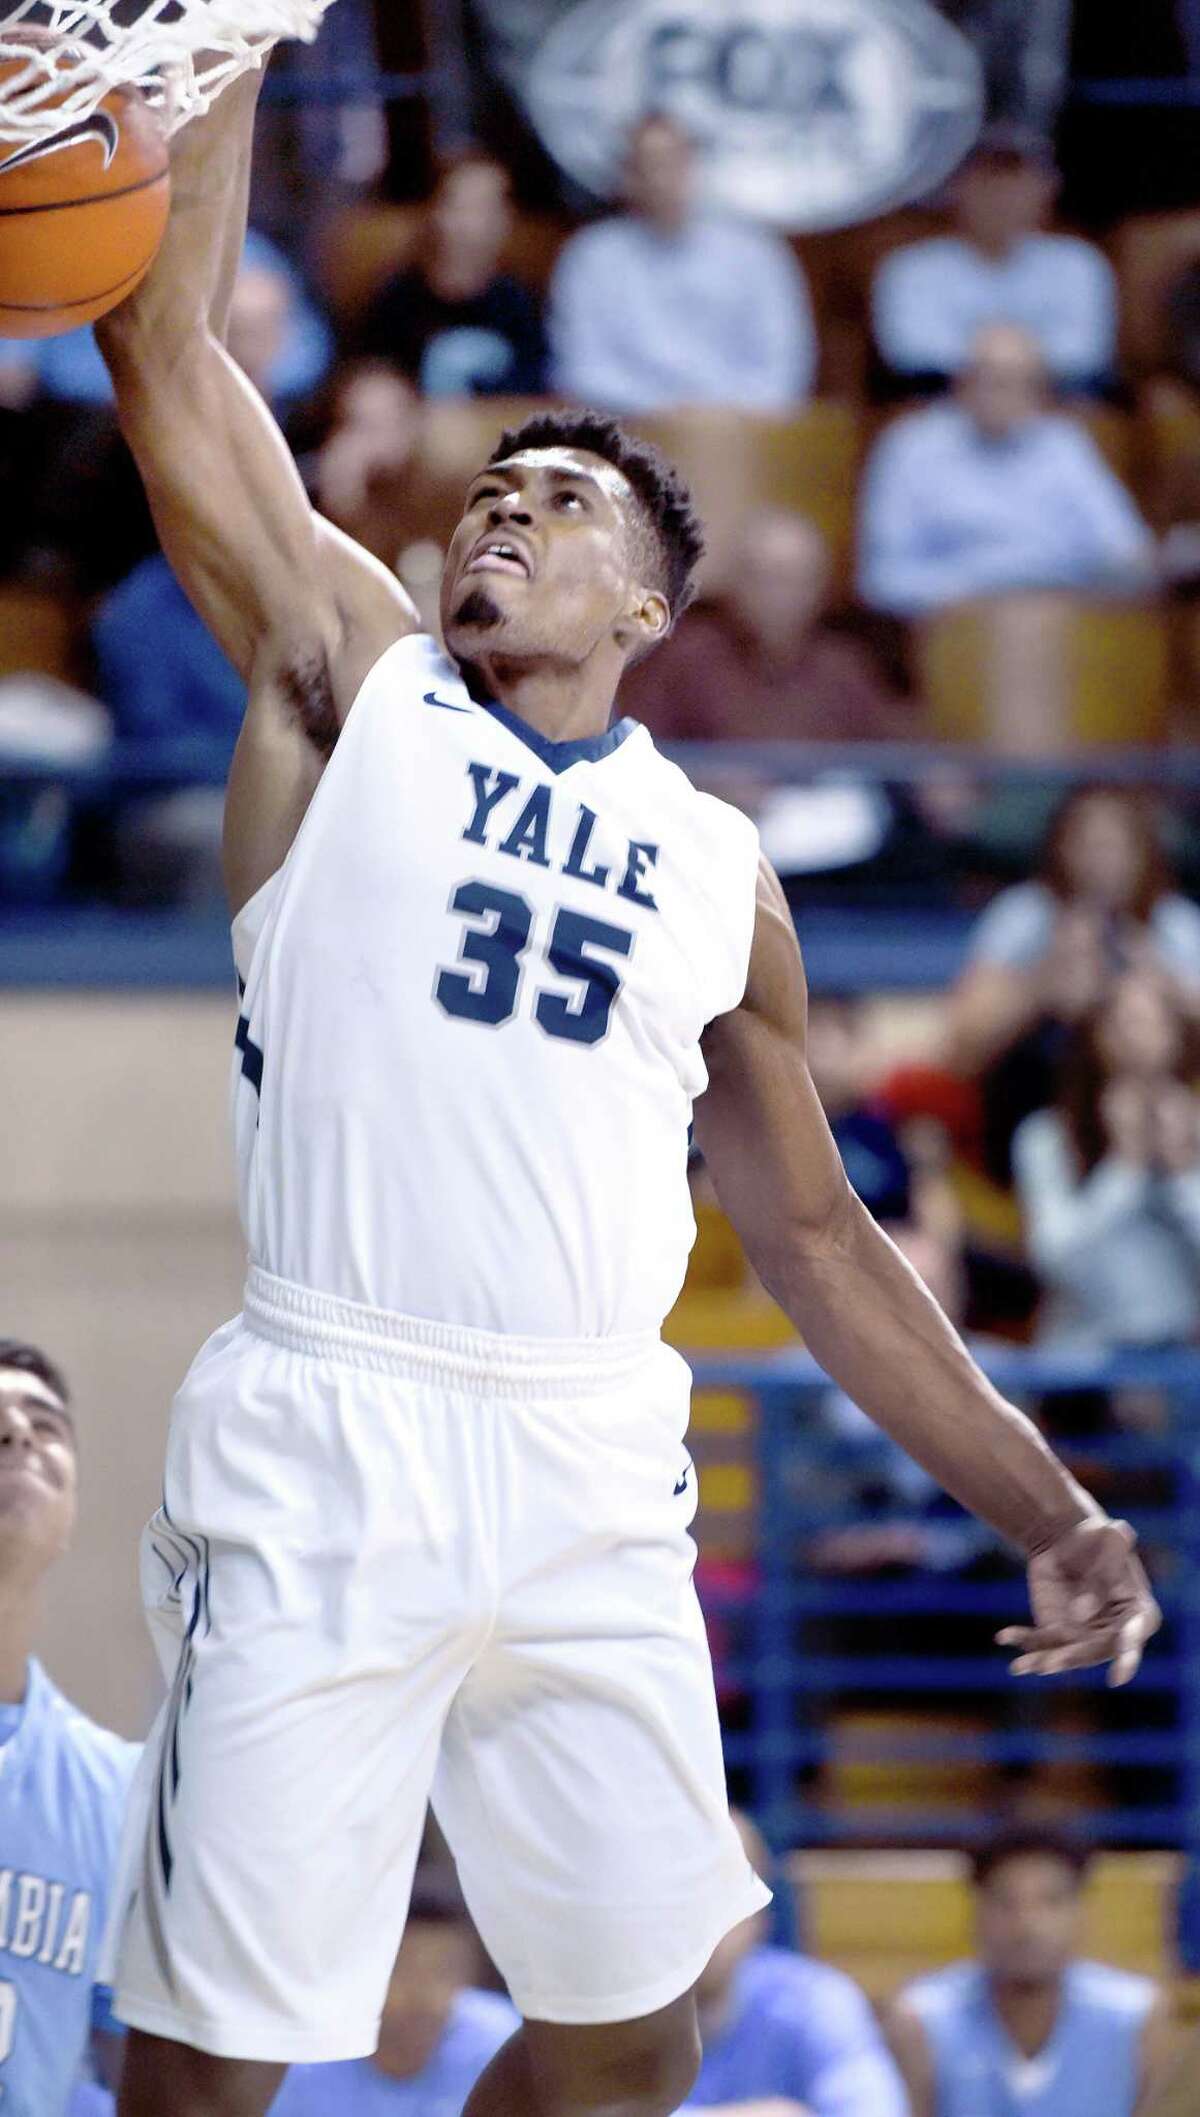 Former Yale standout Brandon Sherrod has signed on to return to play for Roseto of Italy’s Serie A2 league next season.